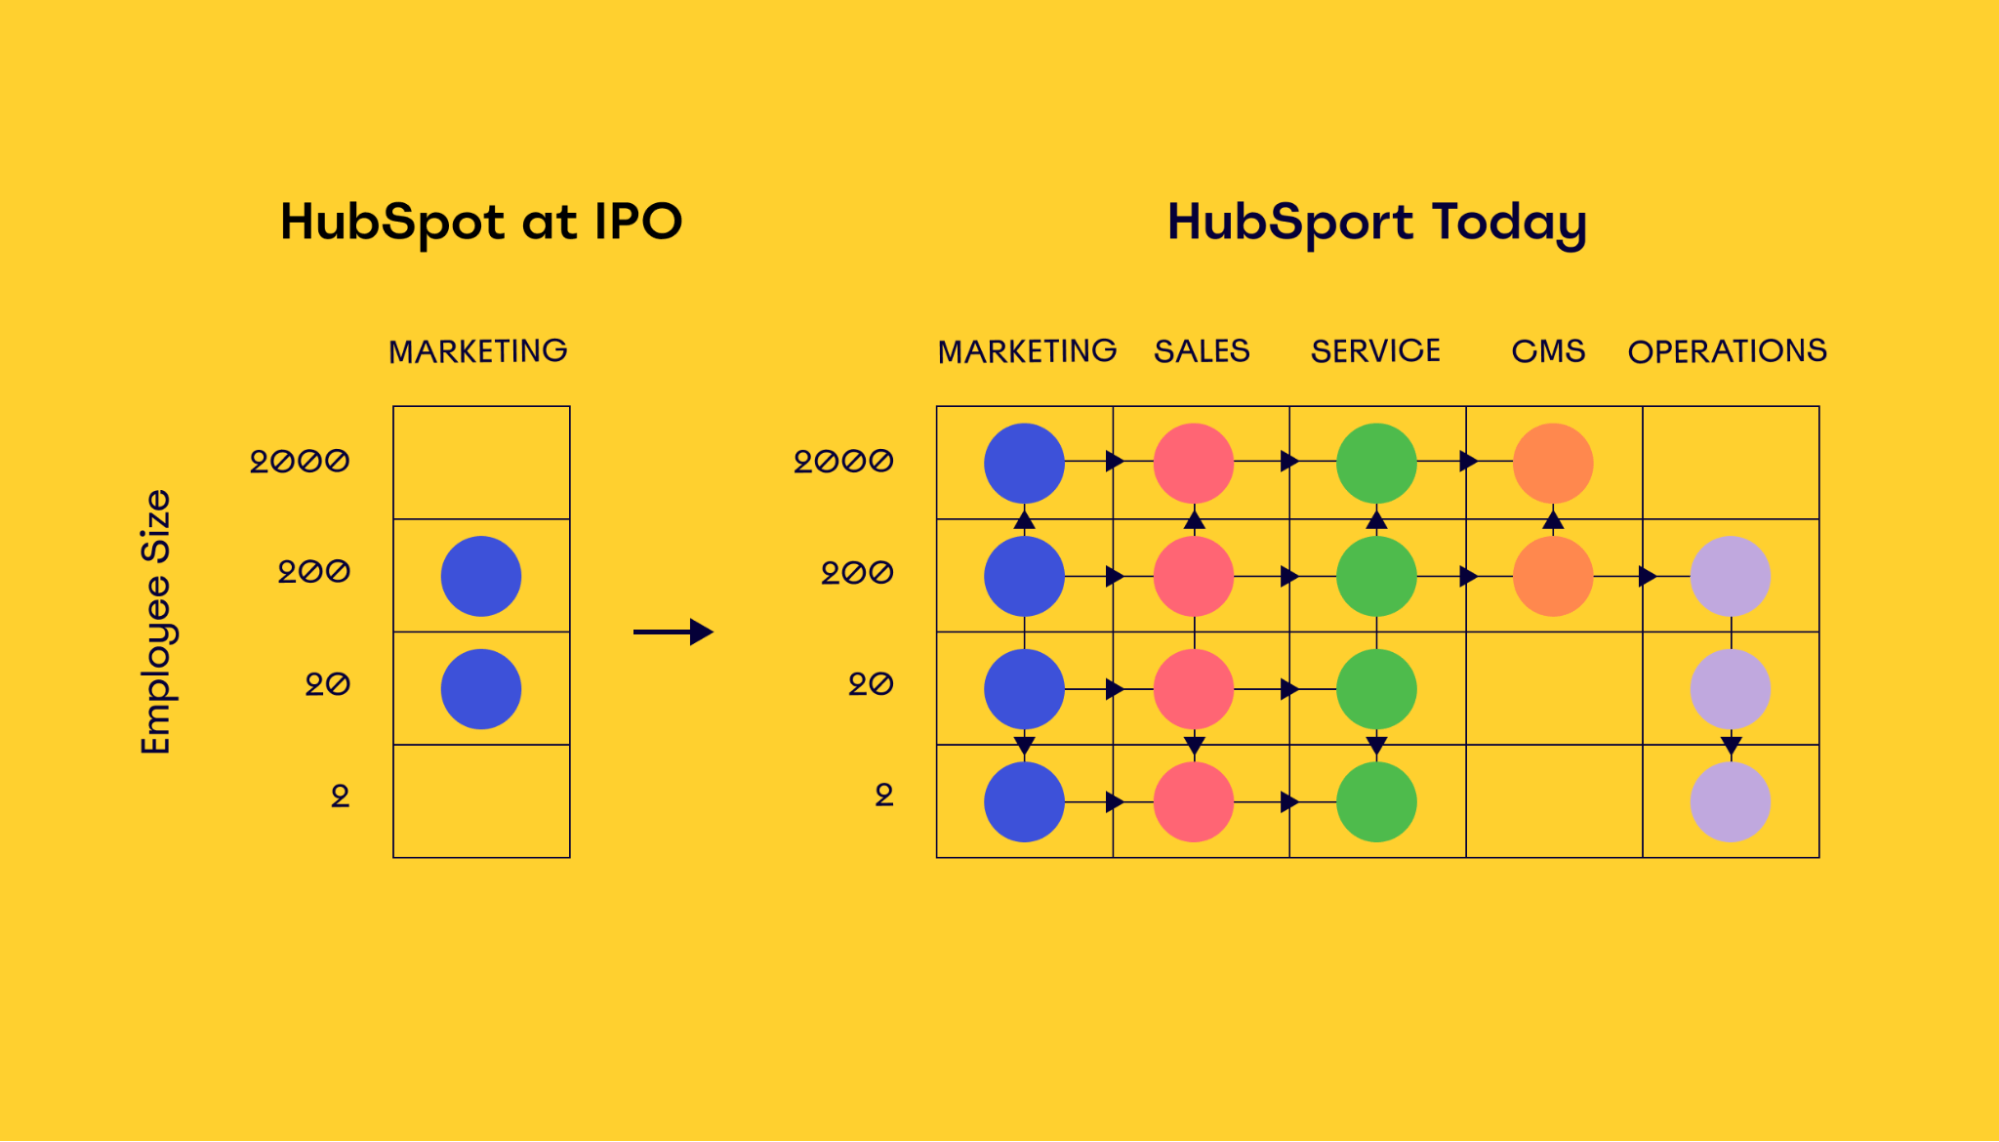 Illustration of how HubSpot’s features have grown over time